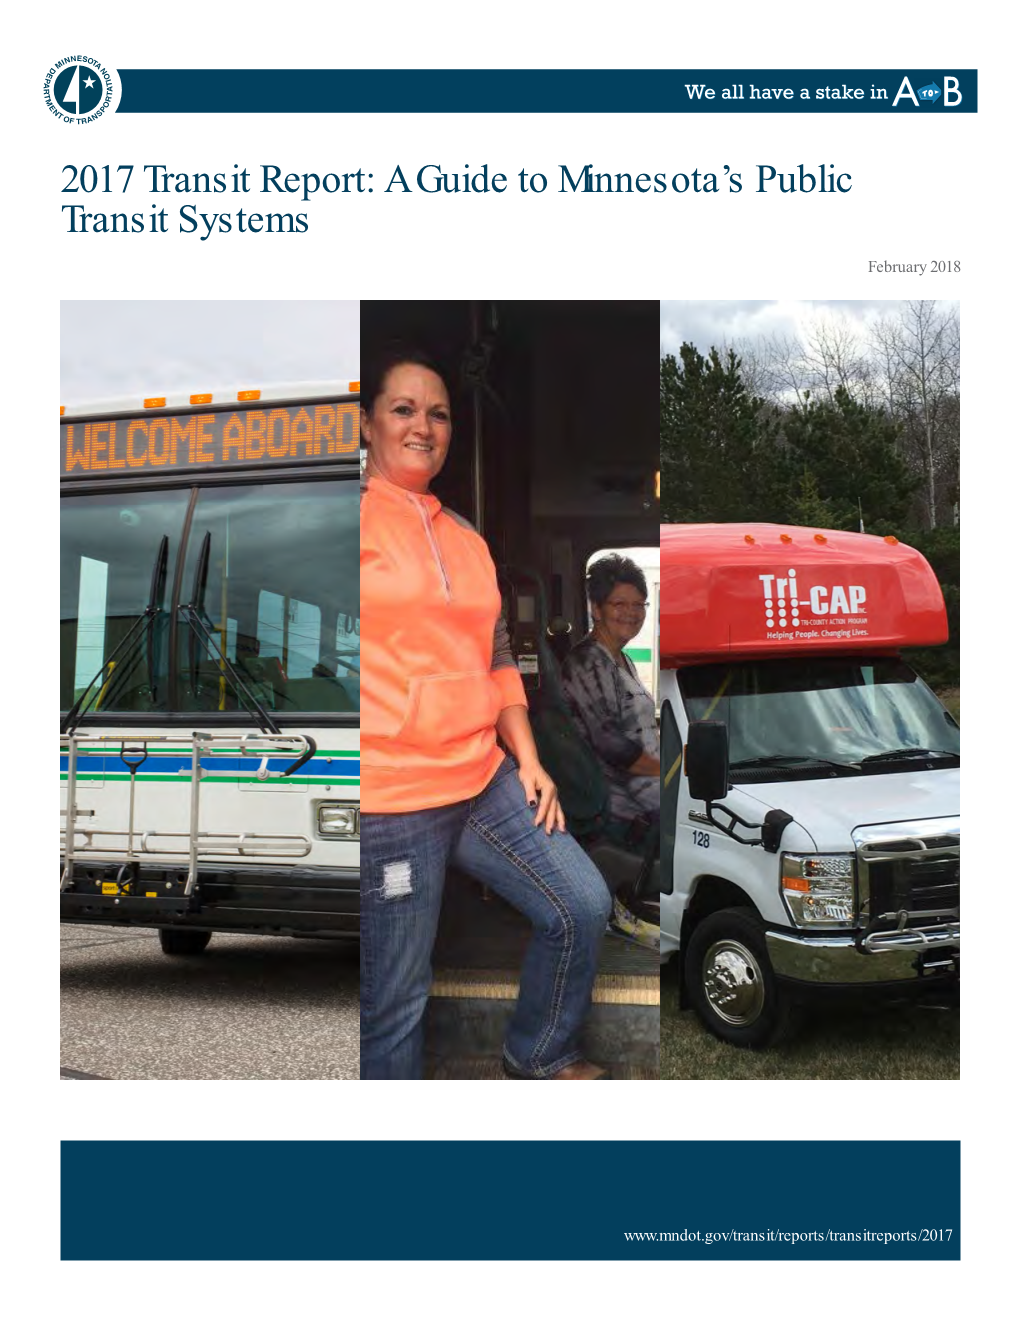 2017 Transit Report: a Guide to Minnesota’S Public Transit Systems February 2018